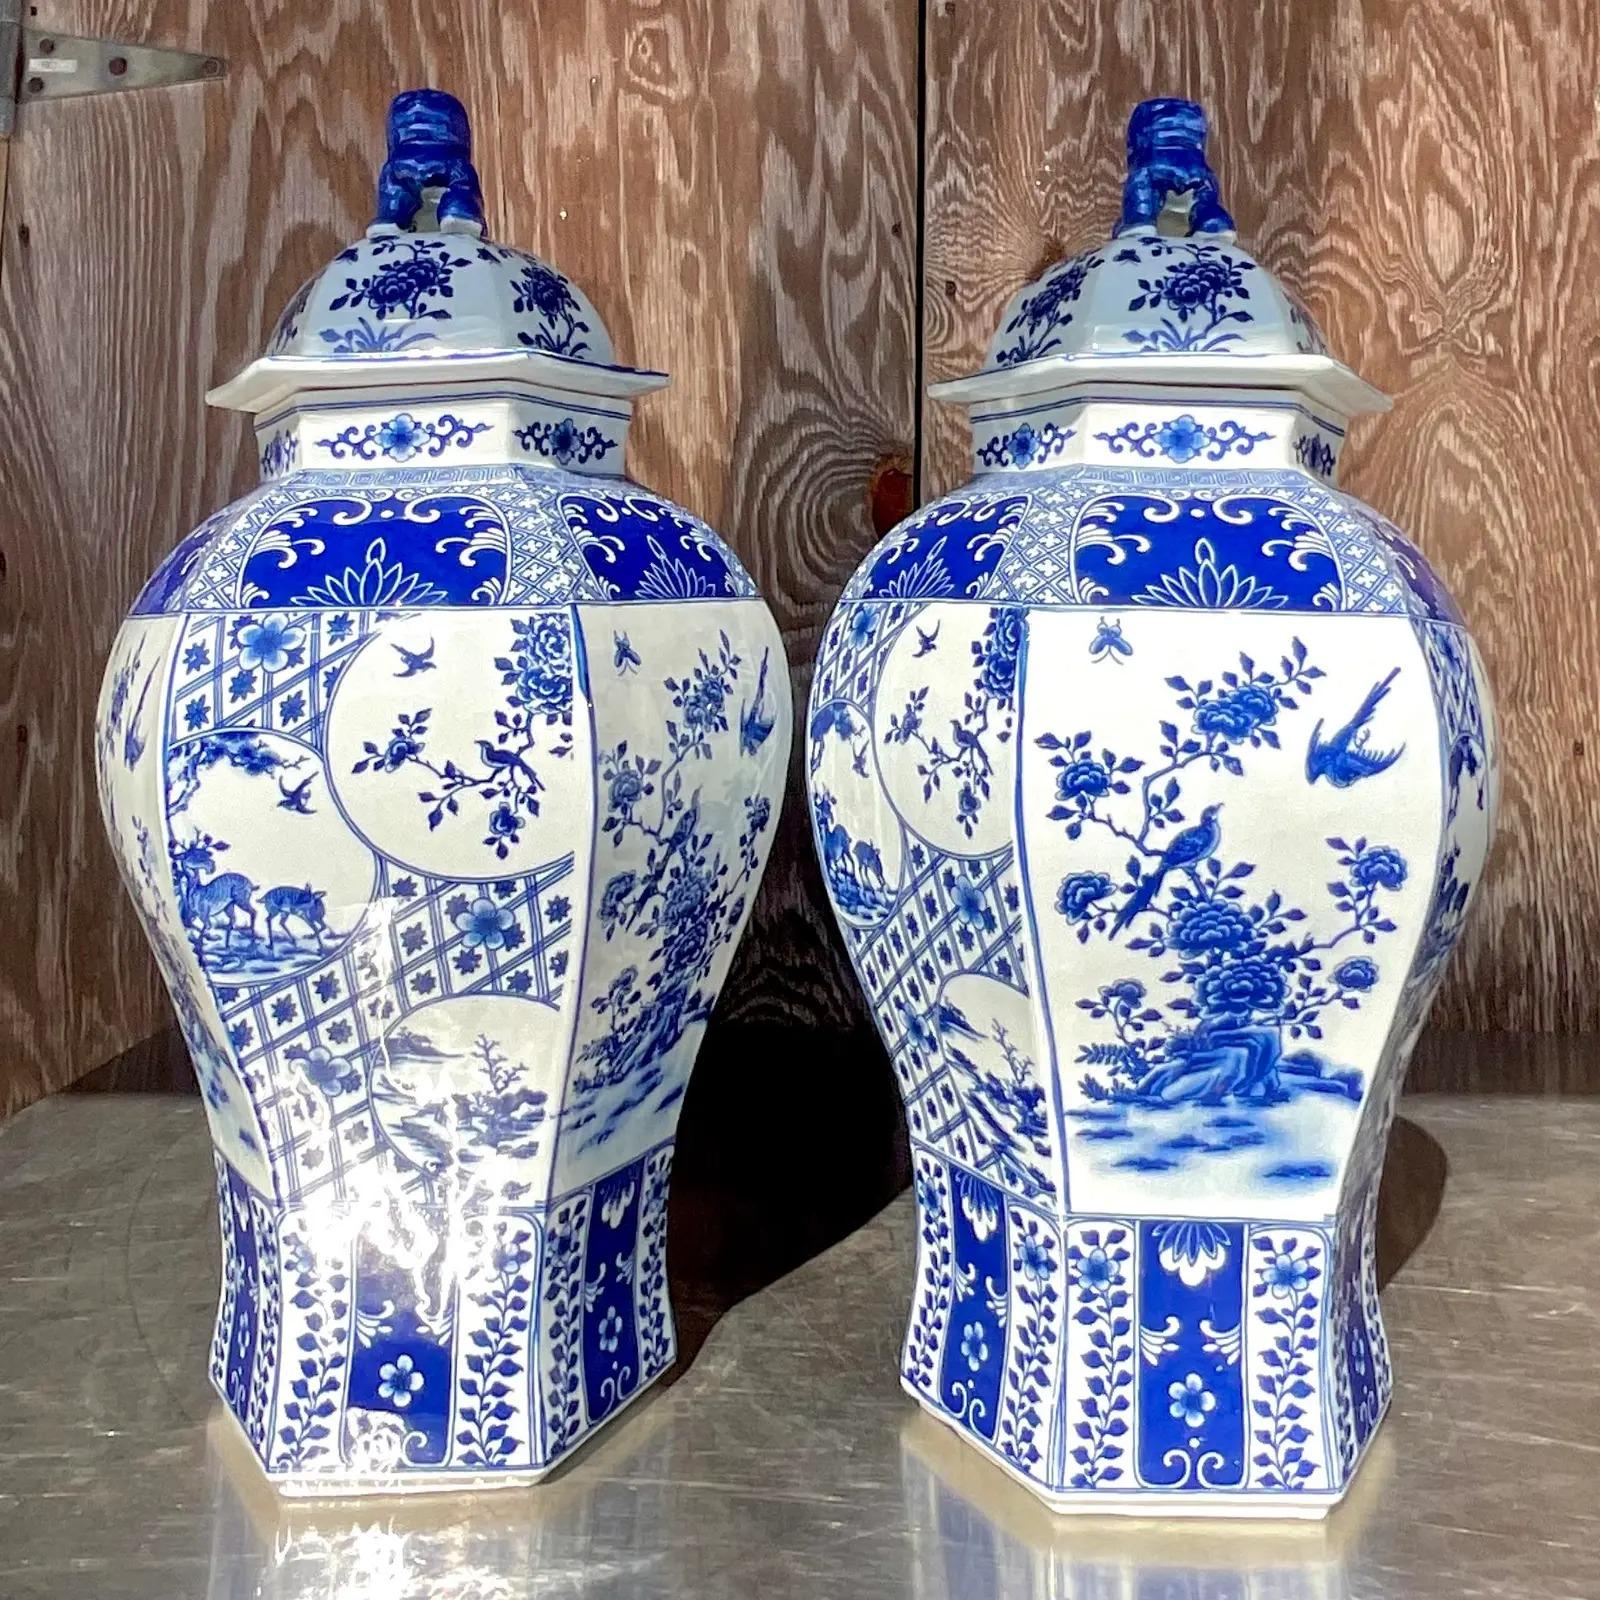 A fabulous pair of vintage Asian tall lidded urns. Beautiful iconic trellis design with love birds and flowers. Large and impressive. Acquired from a Palm Beach estate.